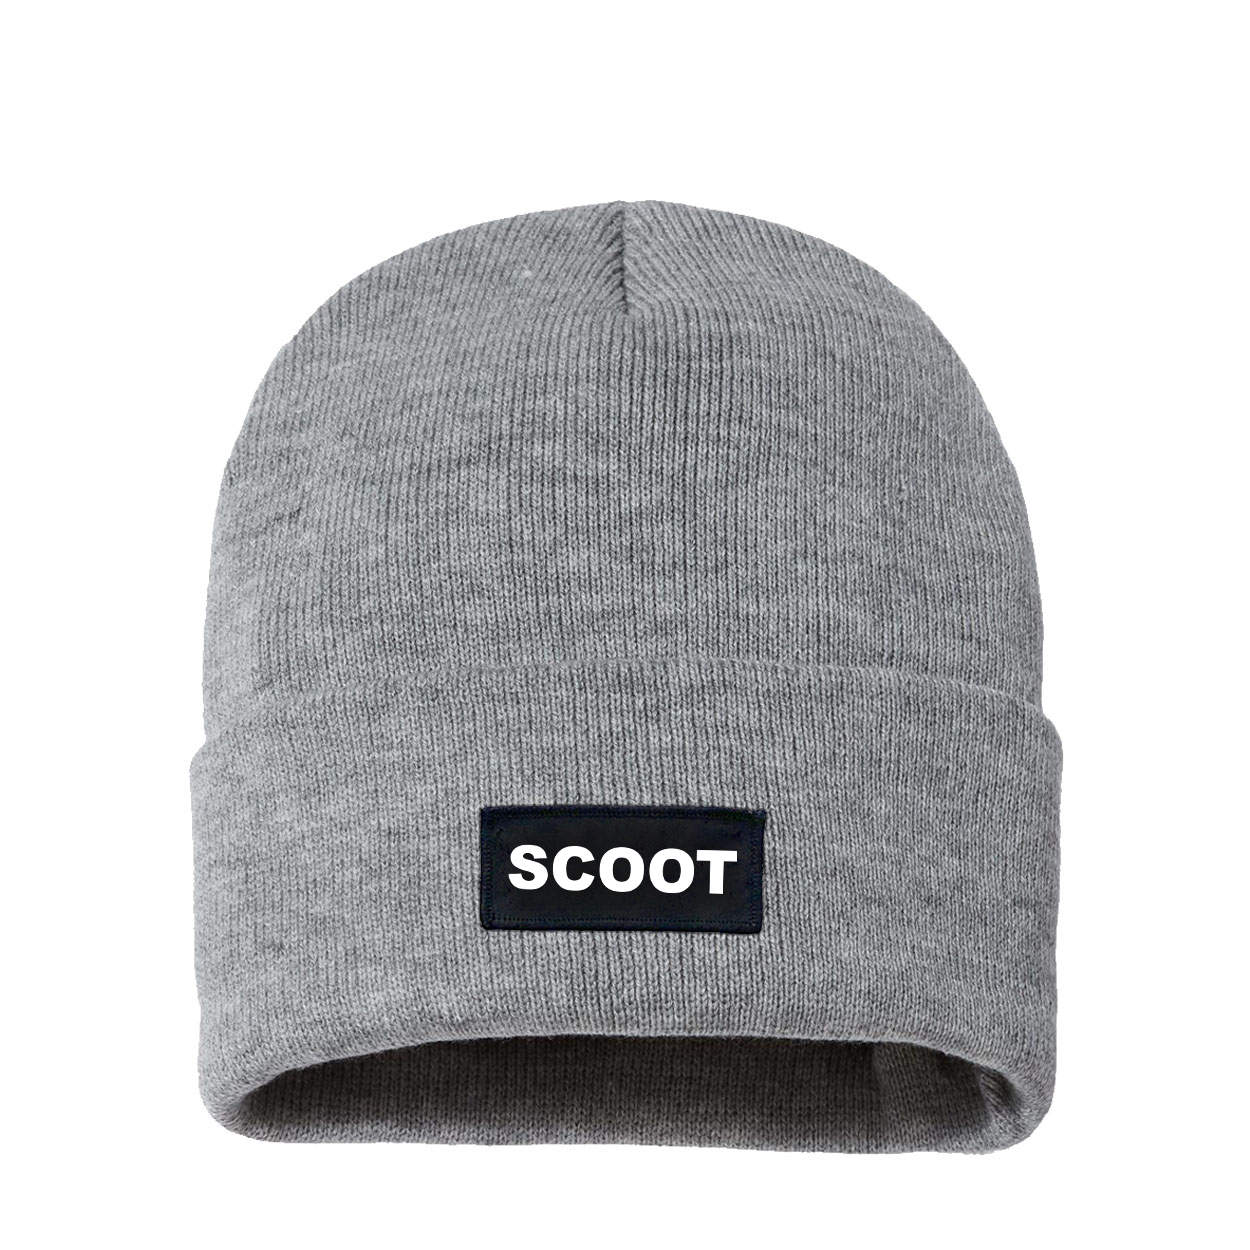 Scoot Brand Logo Night Out Woven Patch Sherpa Lined Cuffed Beanie Heather Gray